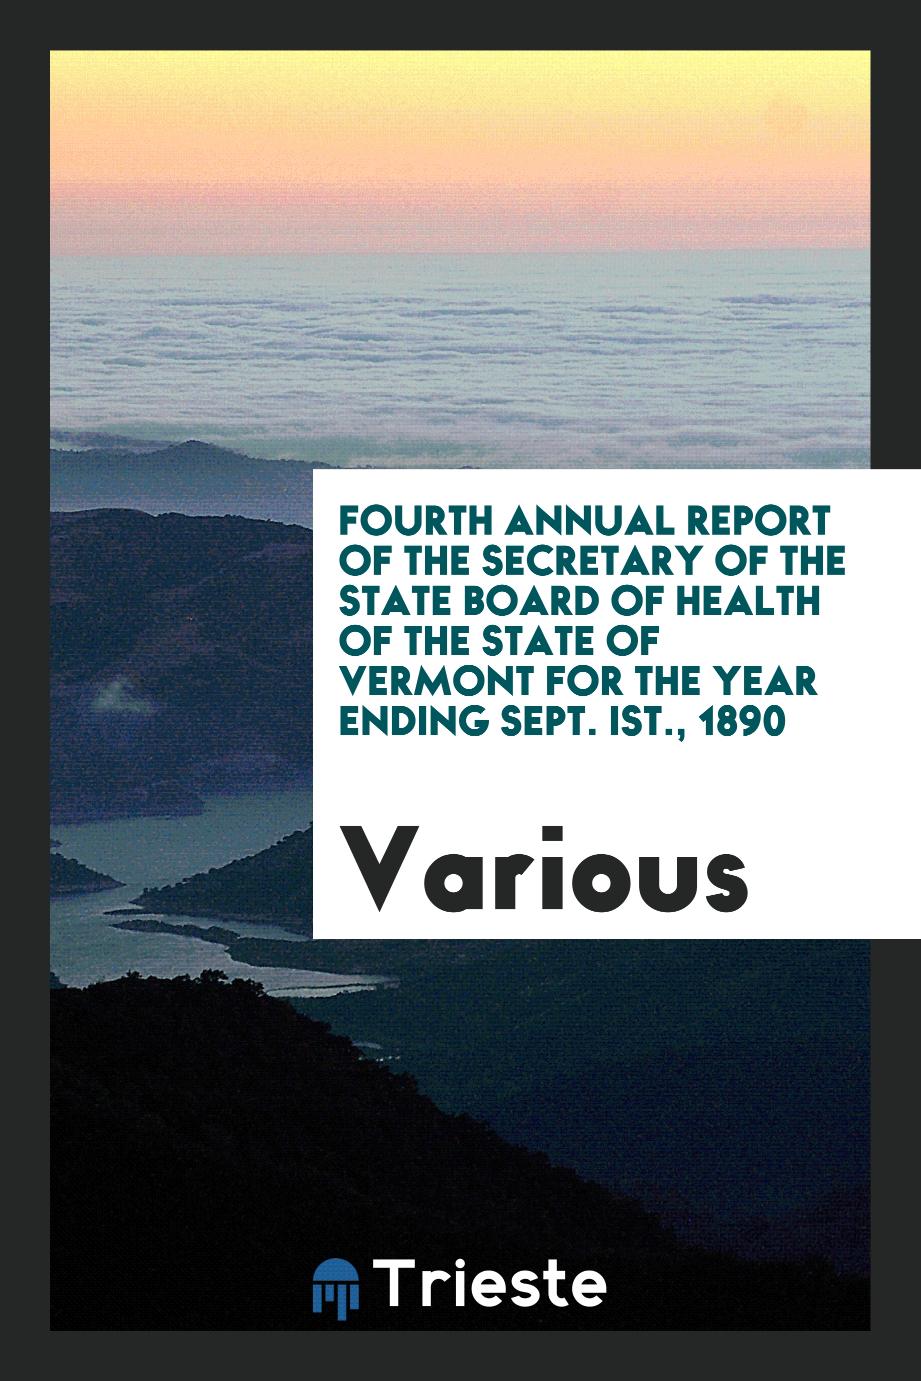 Fourth annual report of the secretary of the State Board of Health of the State of Vermont for the year ending Sept. Ist., 1890